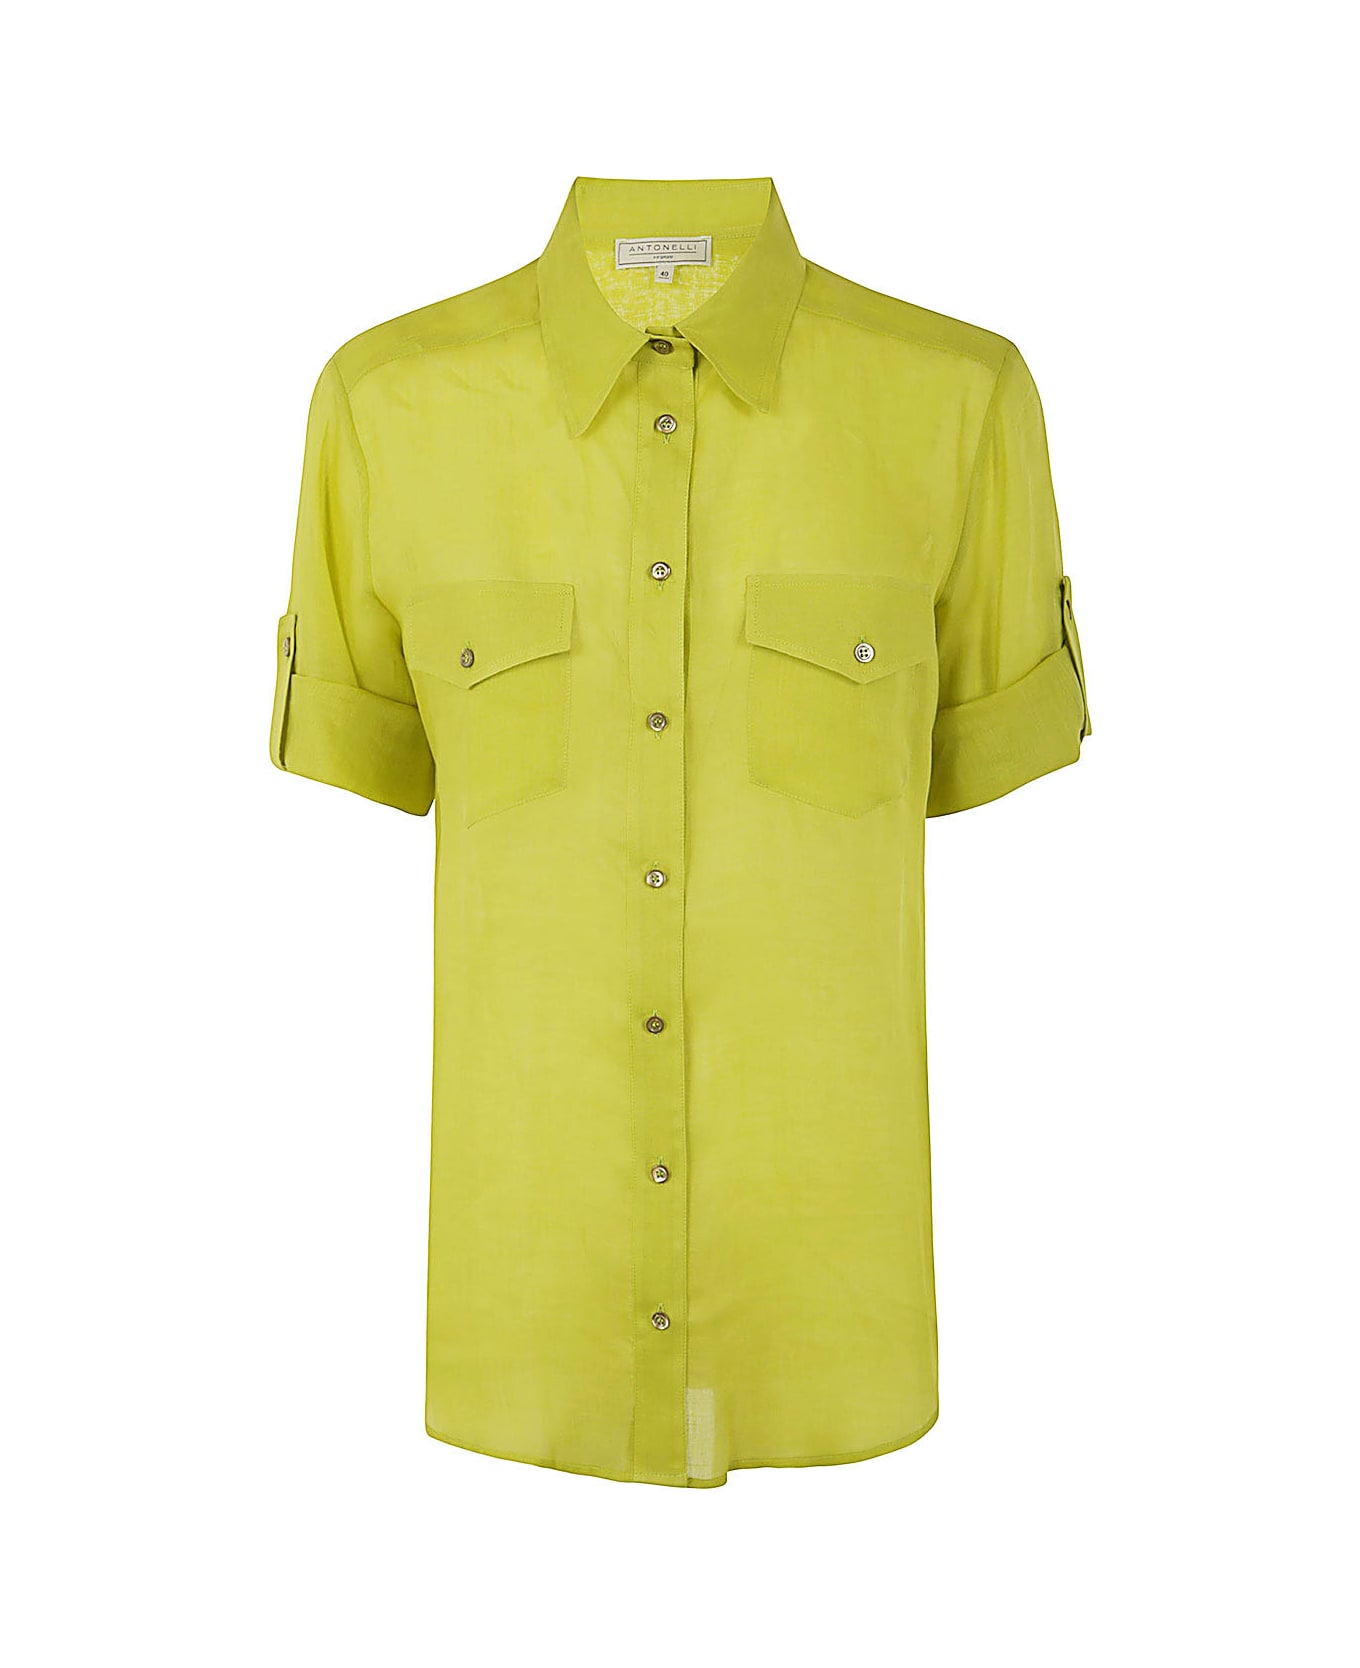 Antonelli Aster 3/4 Sleeves Shirt - Lime